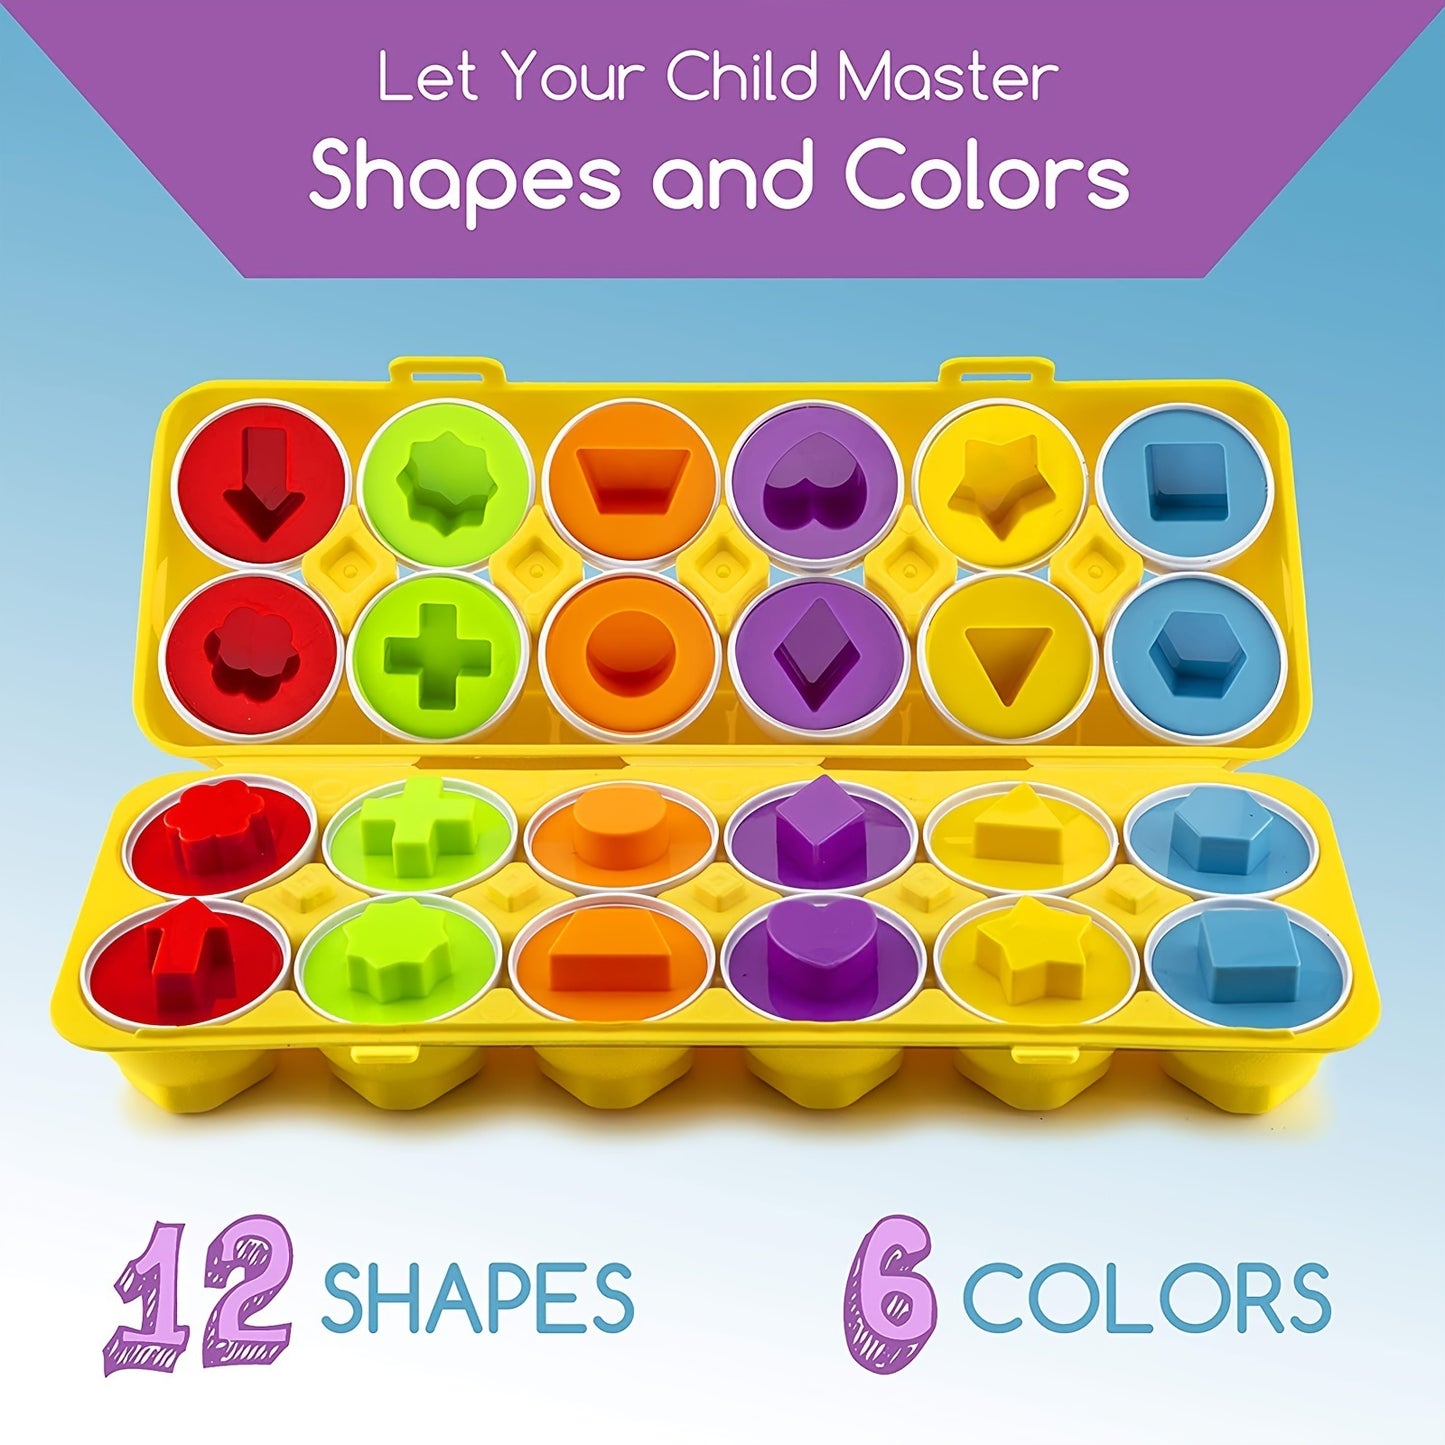 12pcs Matching Eggs Set Easter Egg - Color & Shape Recognition Sorter Skills Toys For Toddlers; Early Learning Educational Fine Motor Skill Montessori Gift For 1 2 3 Year Old Kids Boys And Girls